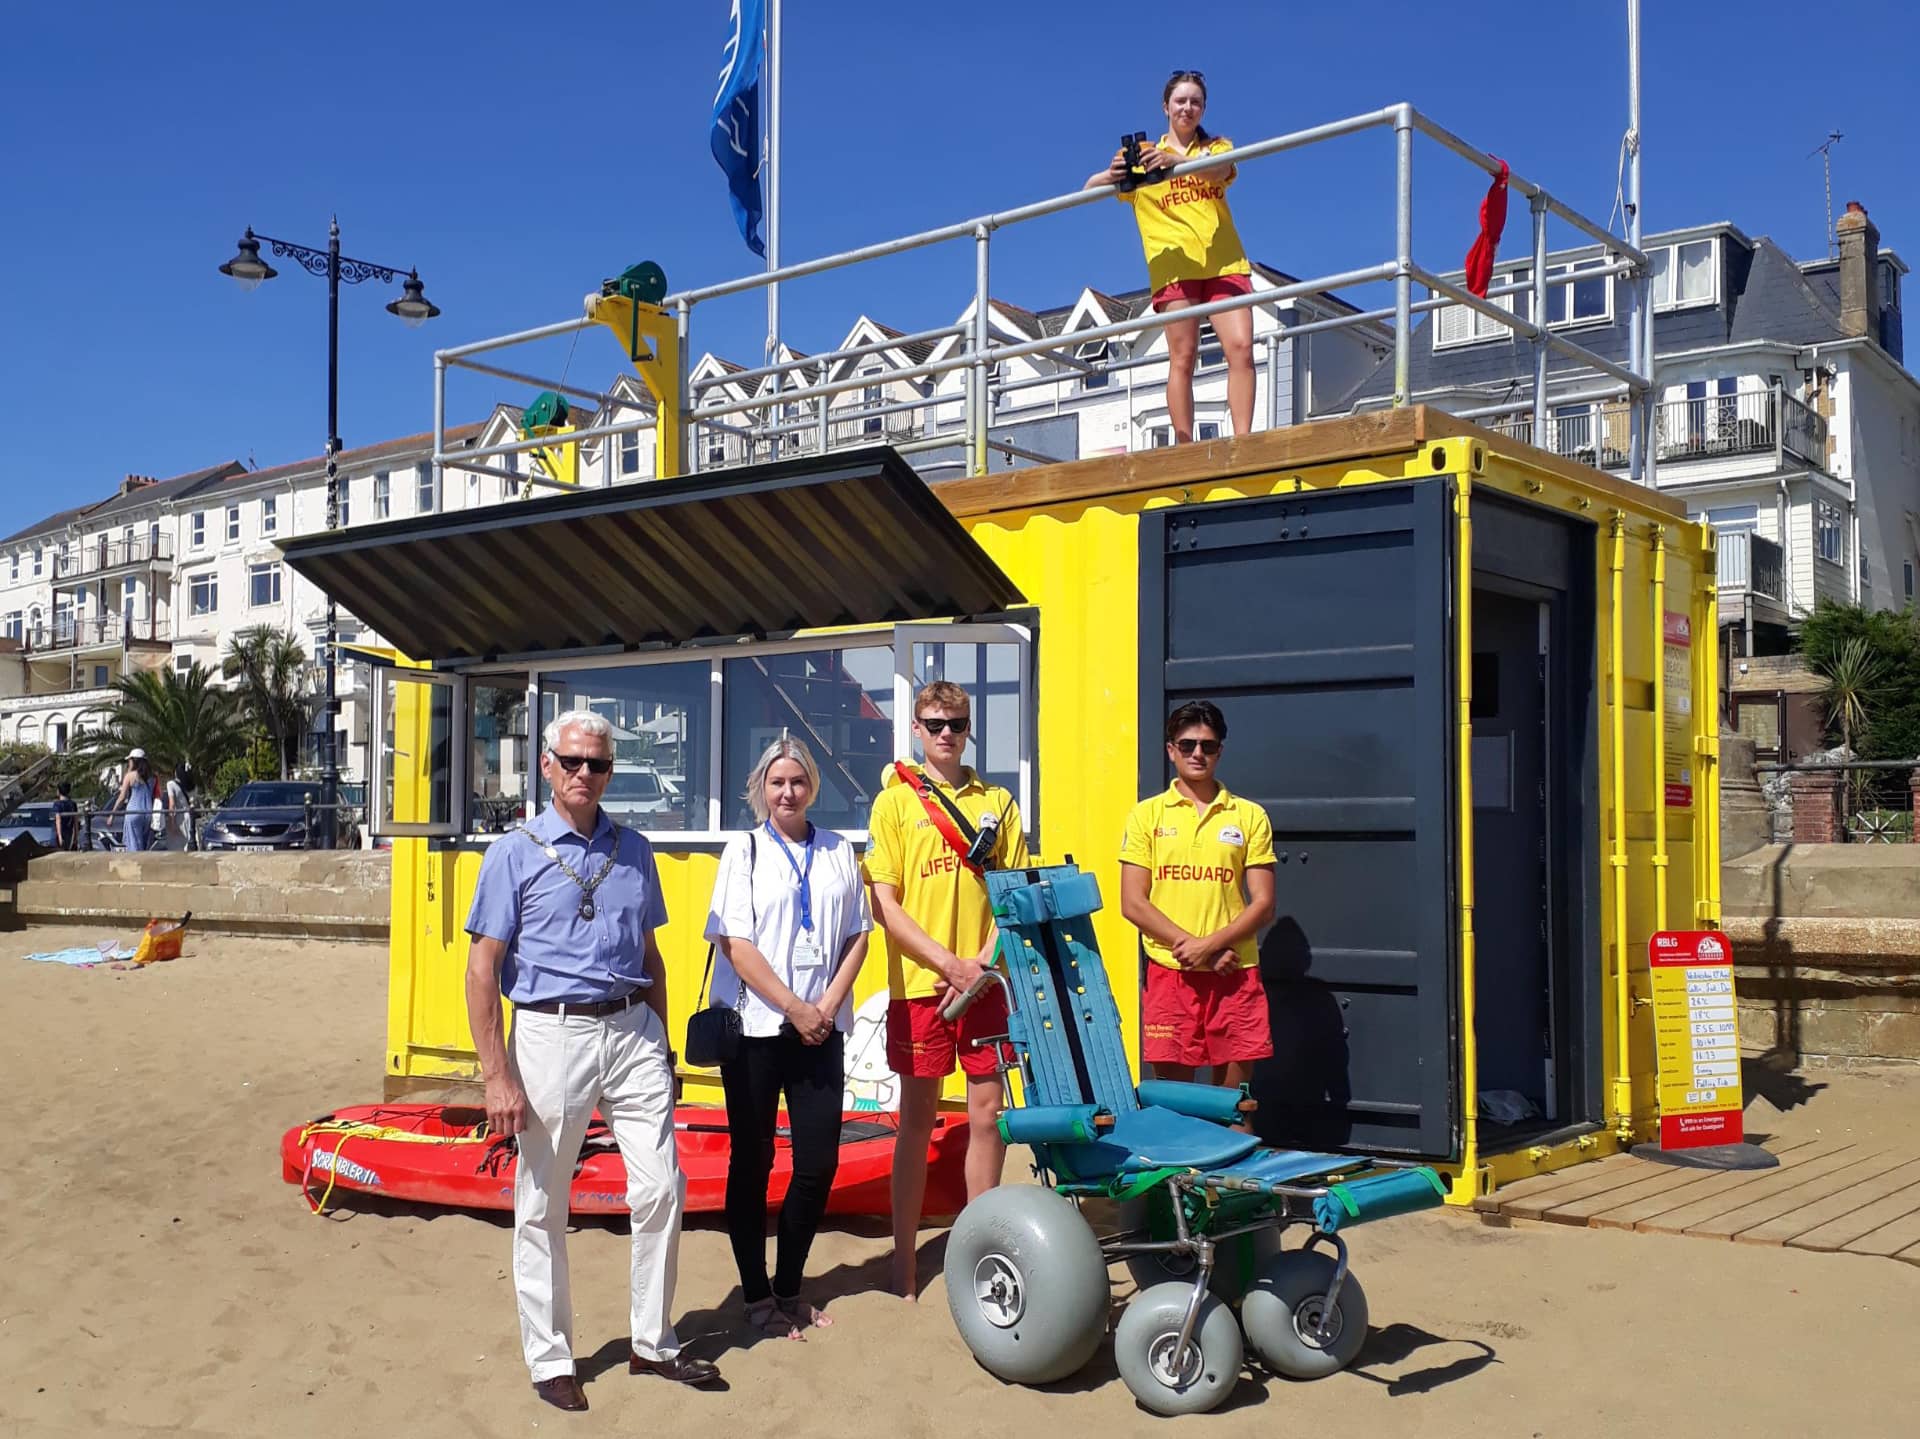 Councillor Paddy Lightfoot, mayor of Sandown, and Danielle Wharton, contract and commissioning officer at the Isle of Wight Council, with Sandown Beach Lifeguards